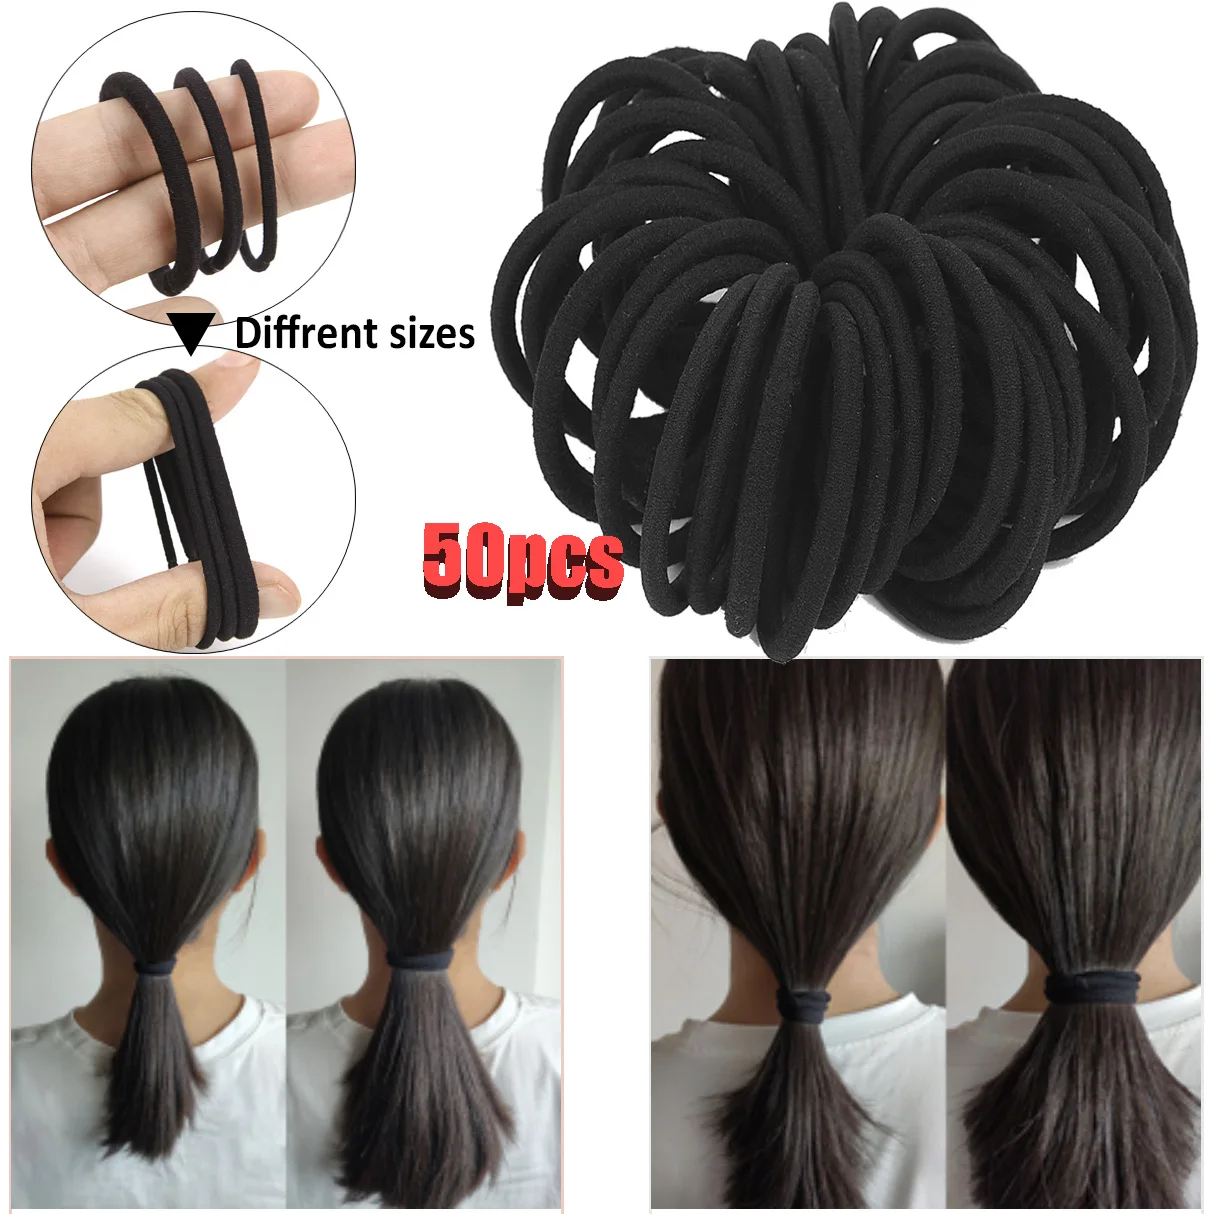 50pcs Black Hairbands for Thick & Less Hair  Elastic Rubber Bands Ropes Basic Hair Ties Hairband Ponytail Holders 3mm 4mm 6mm Hairclip